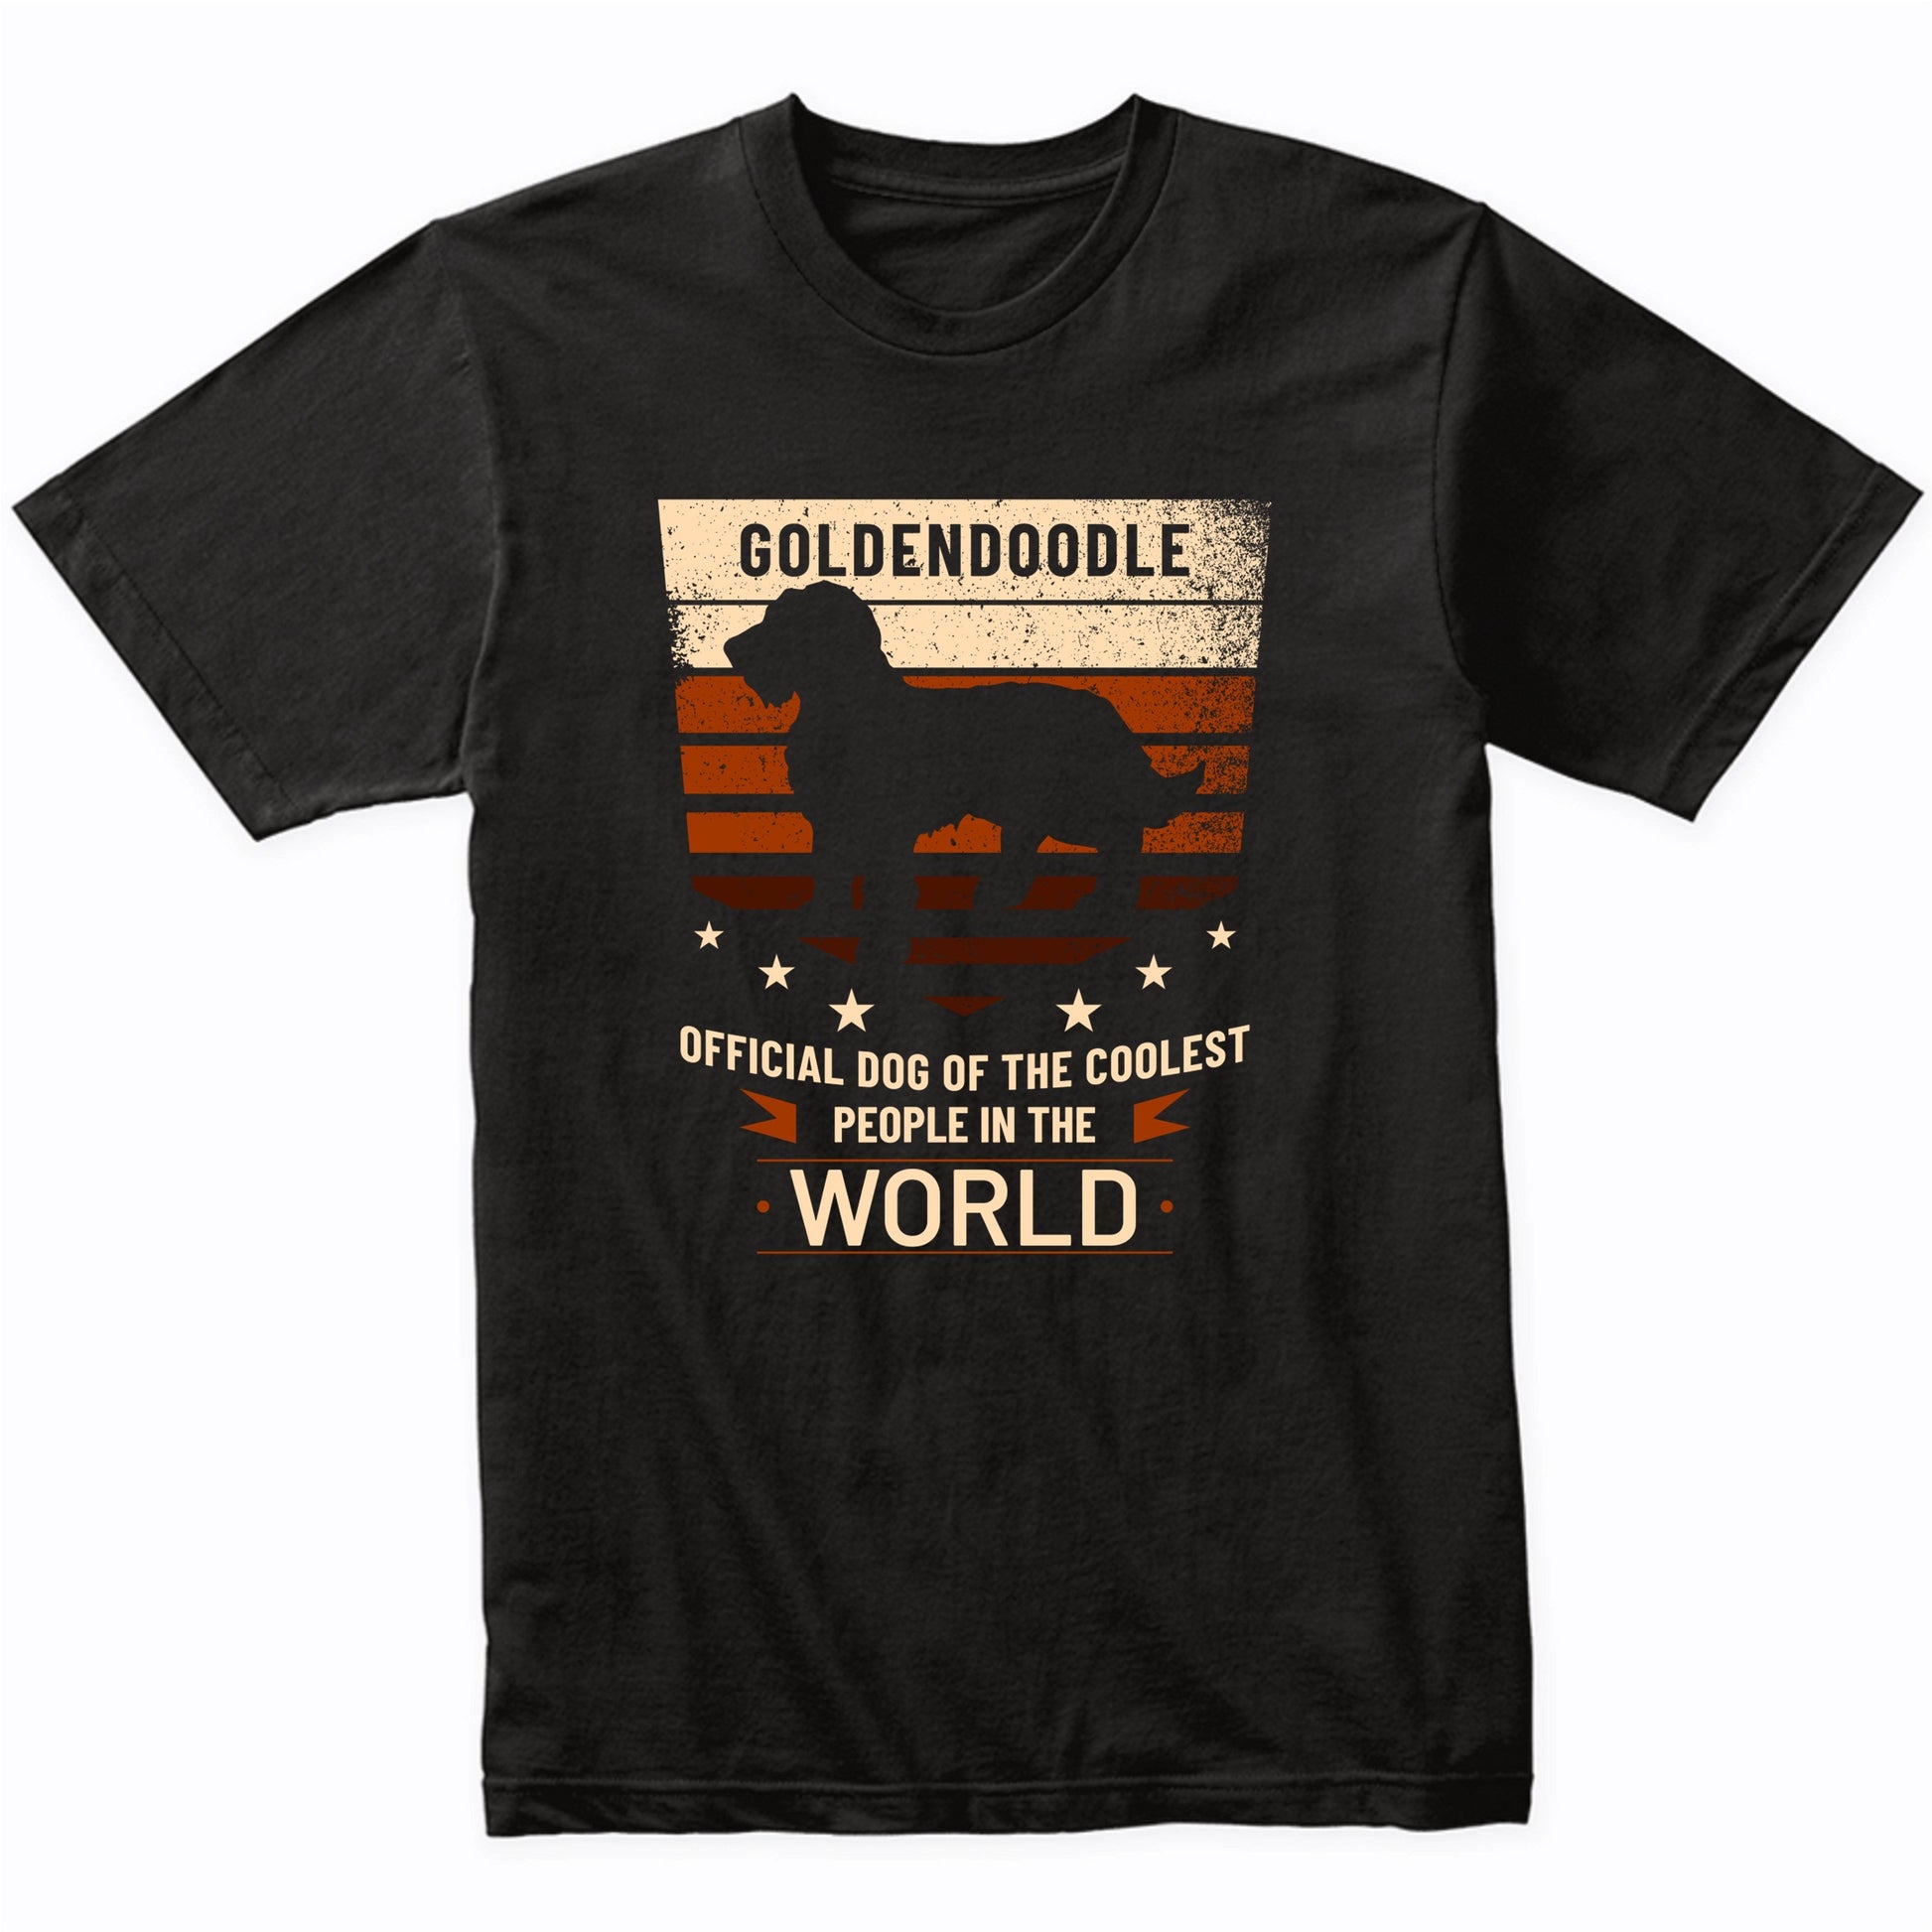 Goldendoodle Official Dog Of The Coolest People In The World T-Shirt